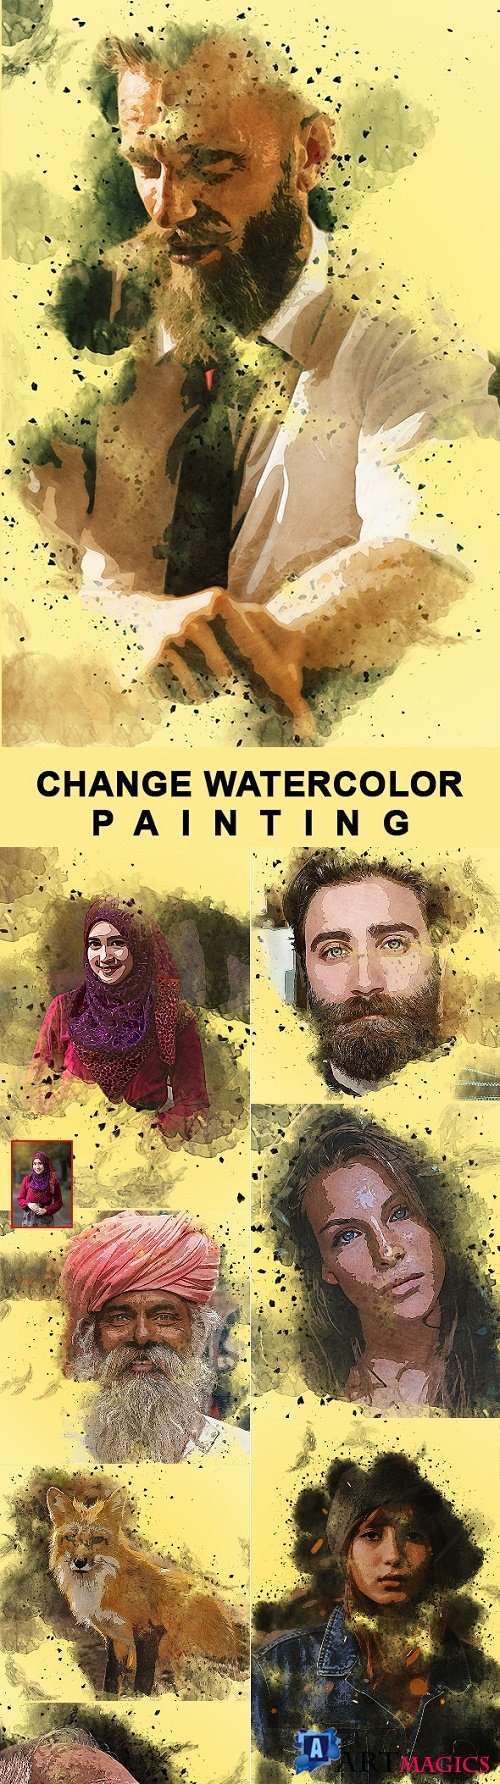 Change Watercolor Painting Photoshop Action 25748479